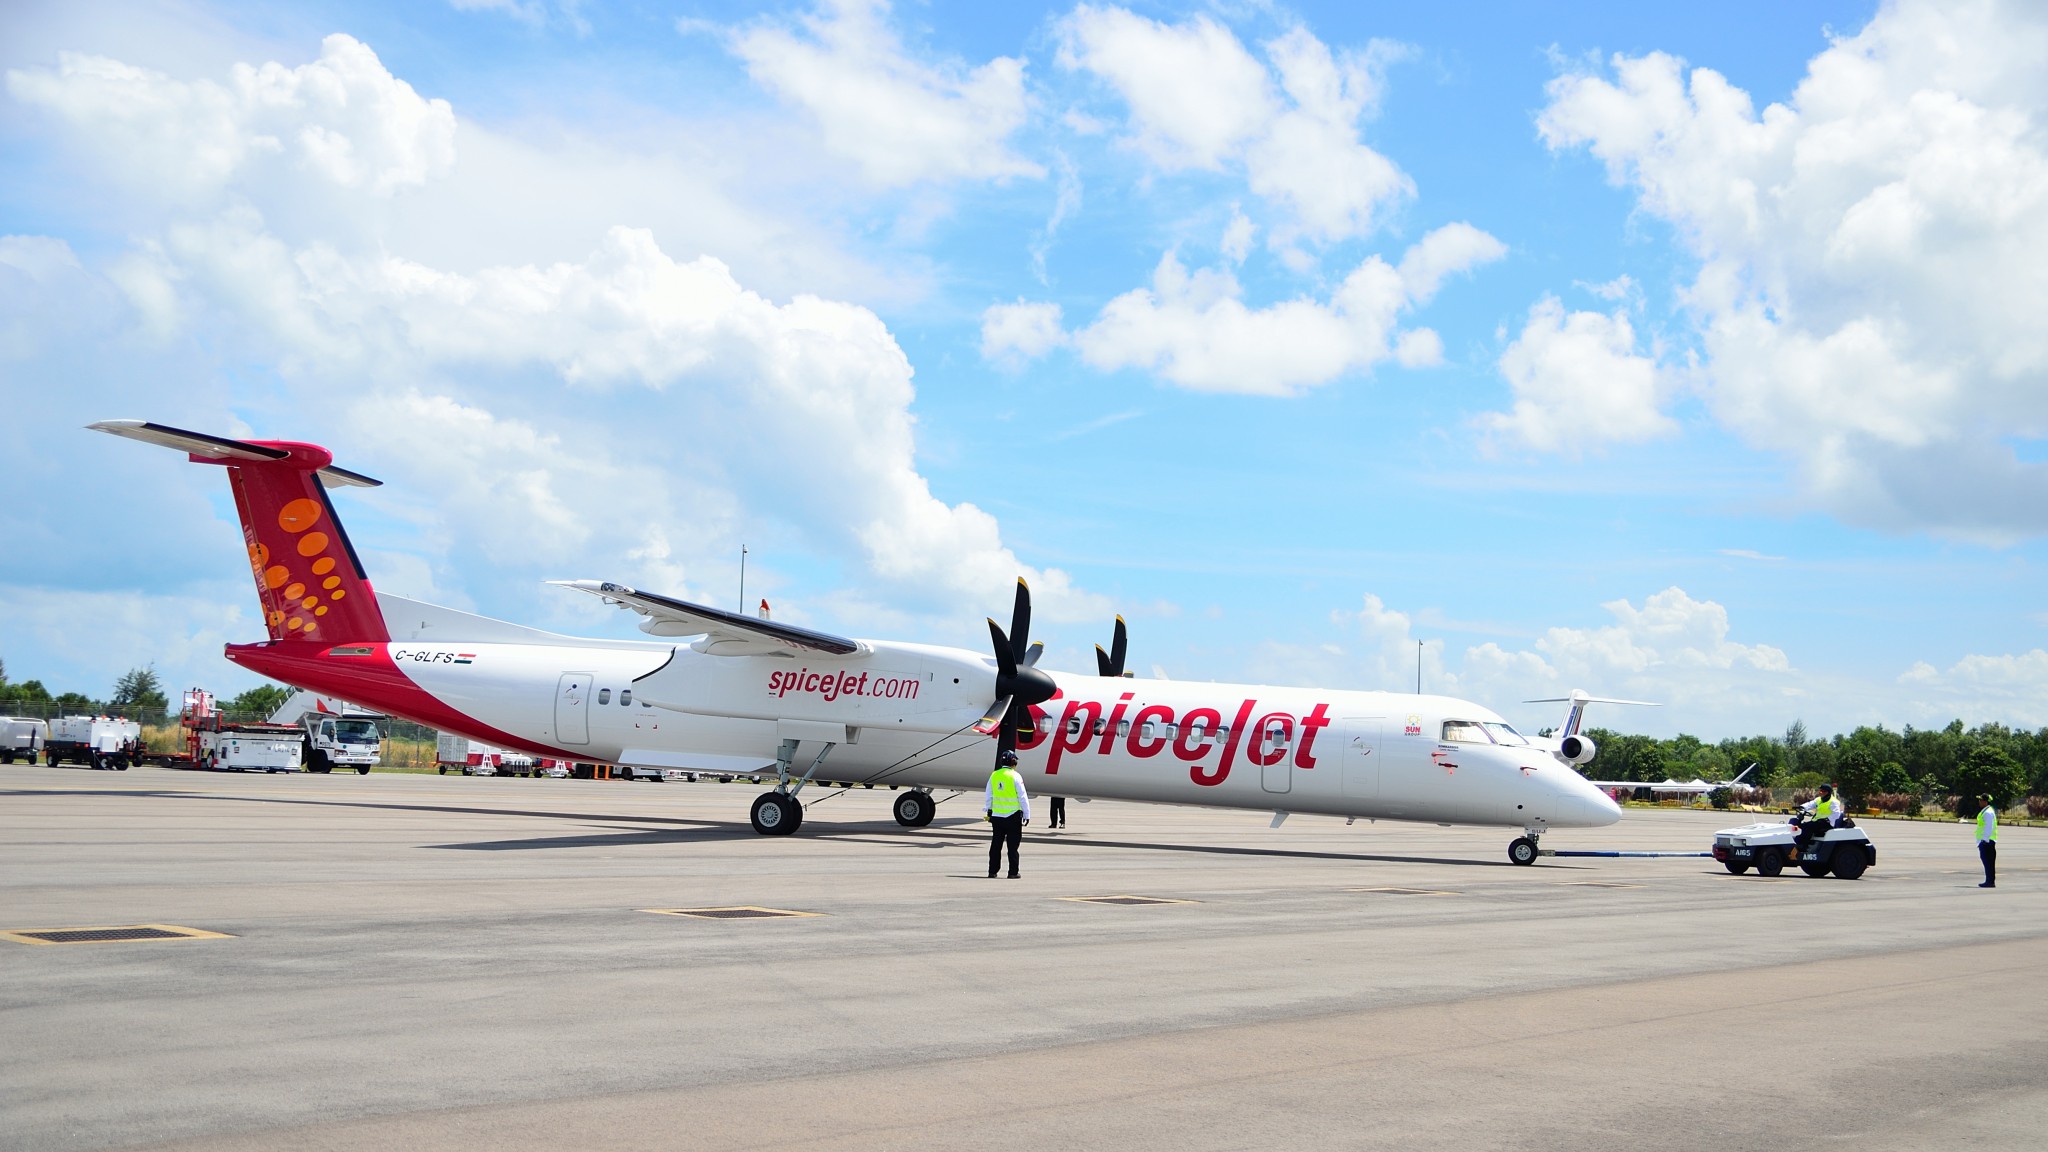 Question looms over SpiceJet audit story as ICAO clarifies visits to operators are not audits